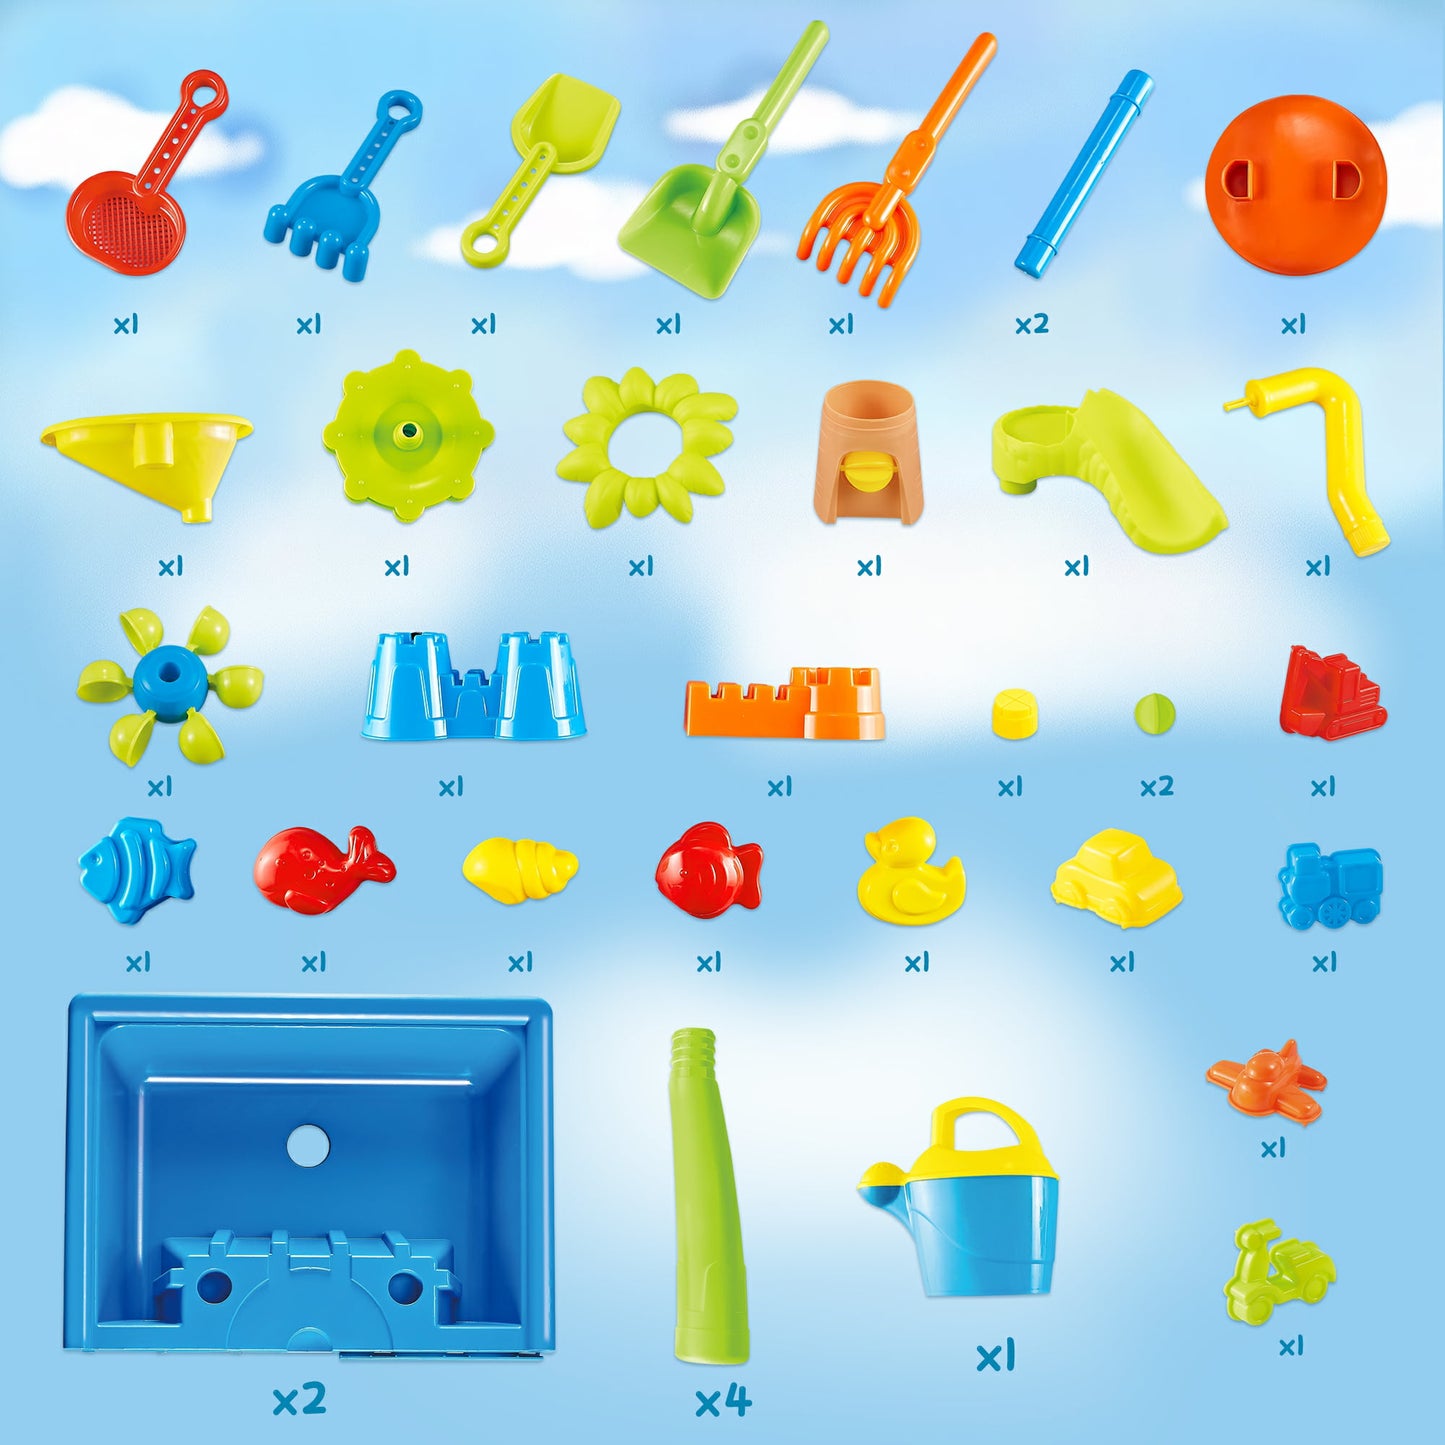 Sand Water Table for Toddlers, Summer Toys Outdoor Sand Play Set for Kids Boy Girls Aged 1 2 3+